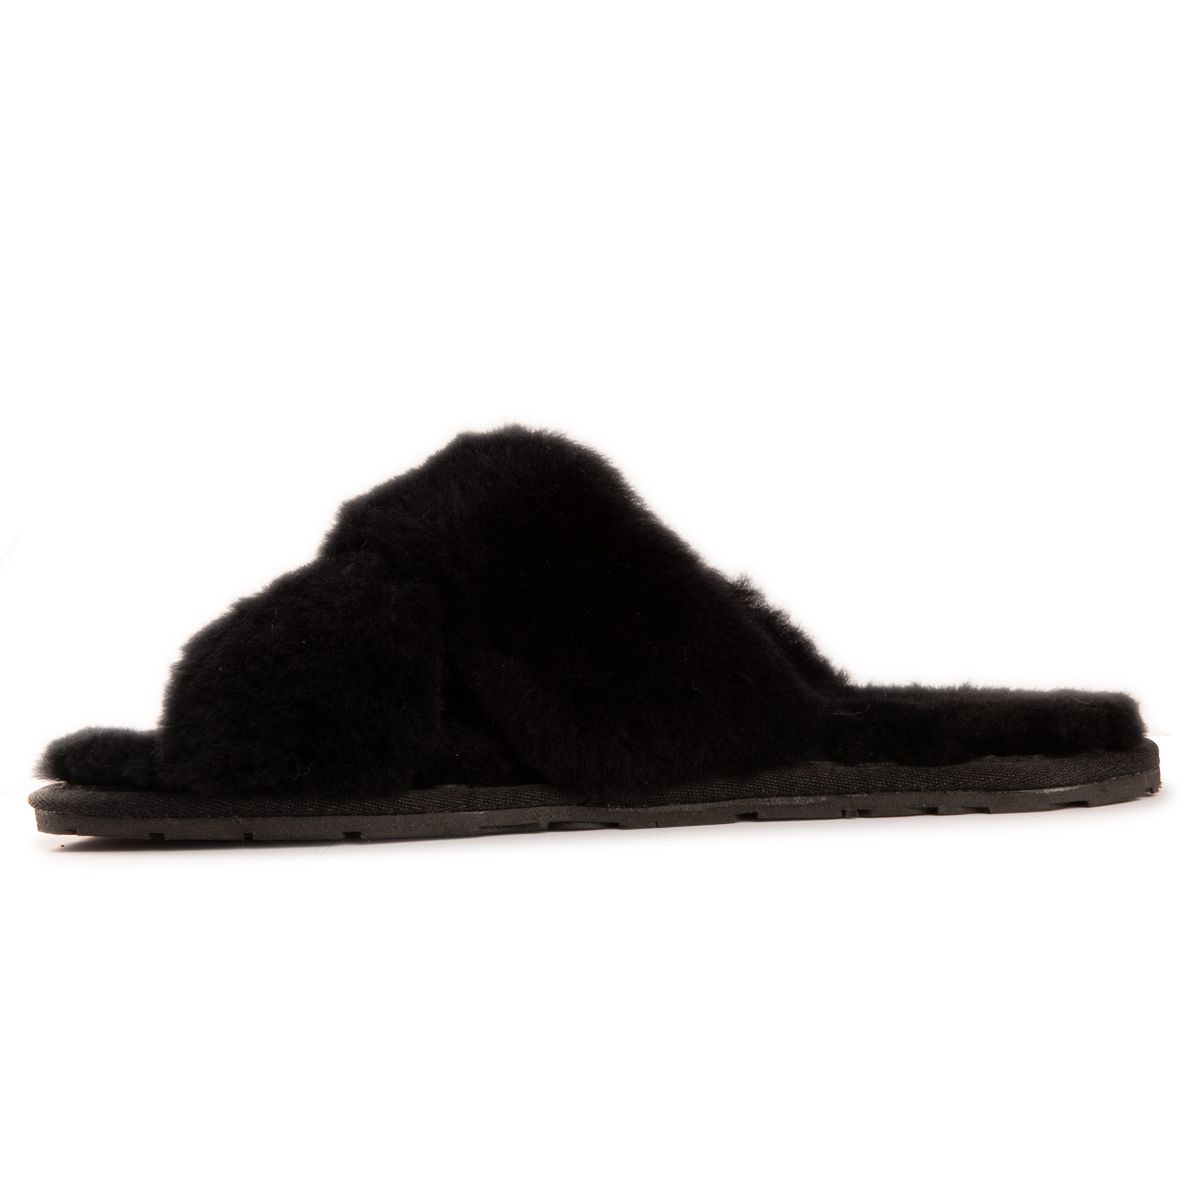 Soft premium genuine Australian Sheepskin wool upper 
 Easy to slide on footwear used in any weather 
 Full premium sheepskin insole 
 Cross over style strap giving a great fit 
 Soft Rubber outsole – highly durable and lightweight 
 Stylish, Fluffy and cosy all at the same time 
 100% brand new and high quality, comes in a branded box, suitable for gifting